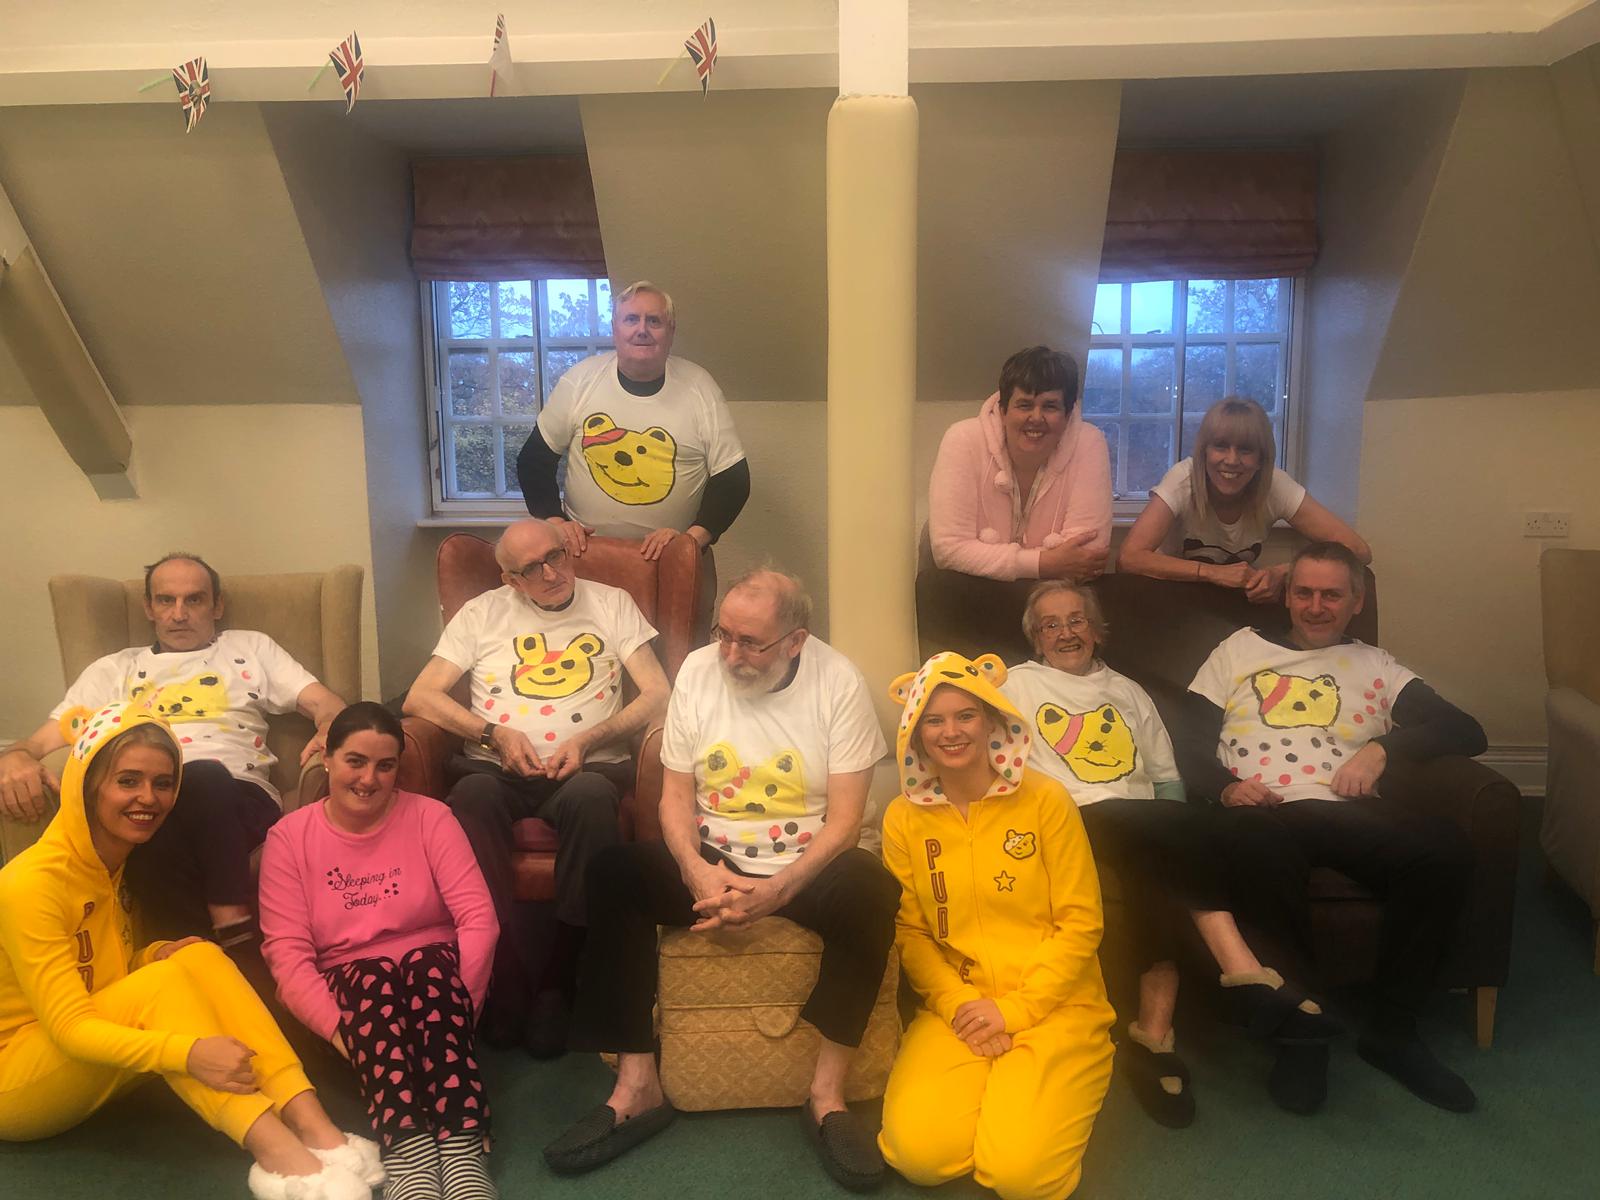 Children In Need 1: Key Healthcare is dedicated to caring for elderly residents in safe. We have multiple dementia care homes including our care home middlesbrough, our care home St. Helen and care home saltburn. We excel in monitoring and improving care levels.